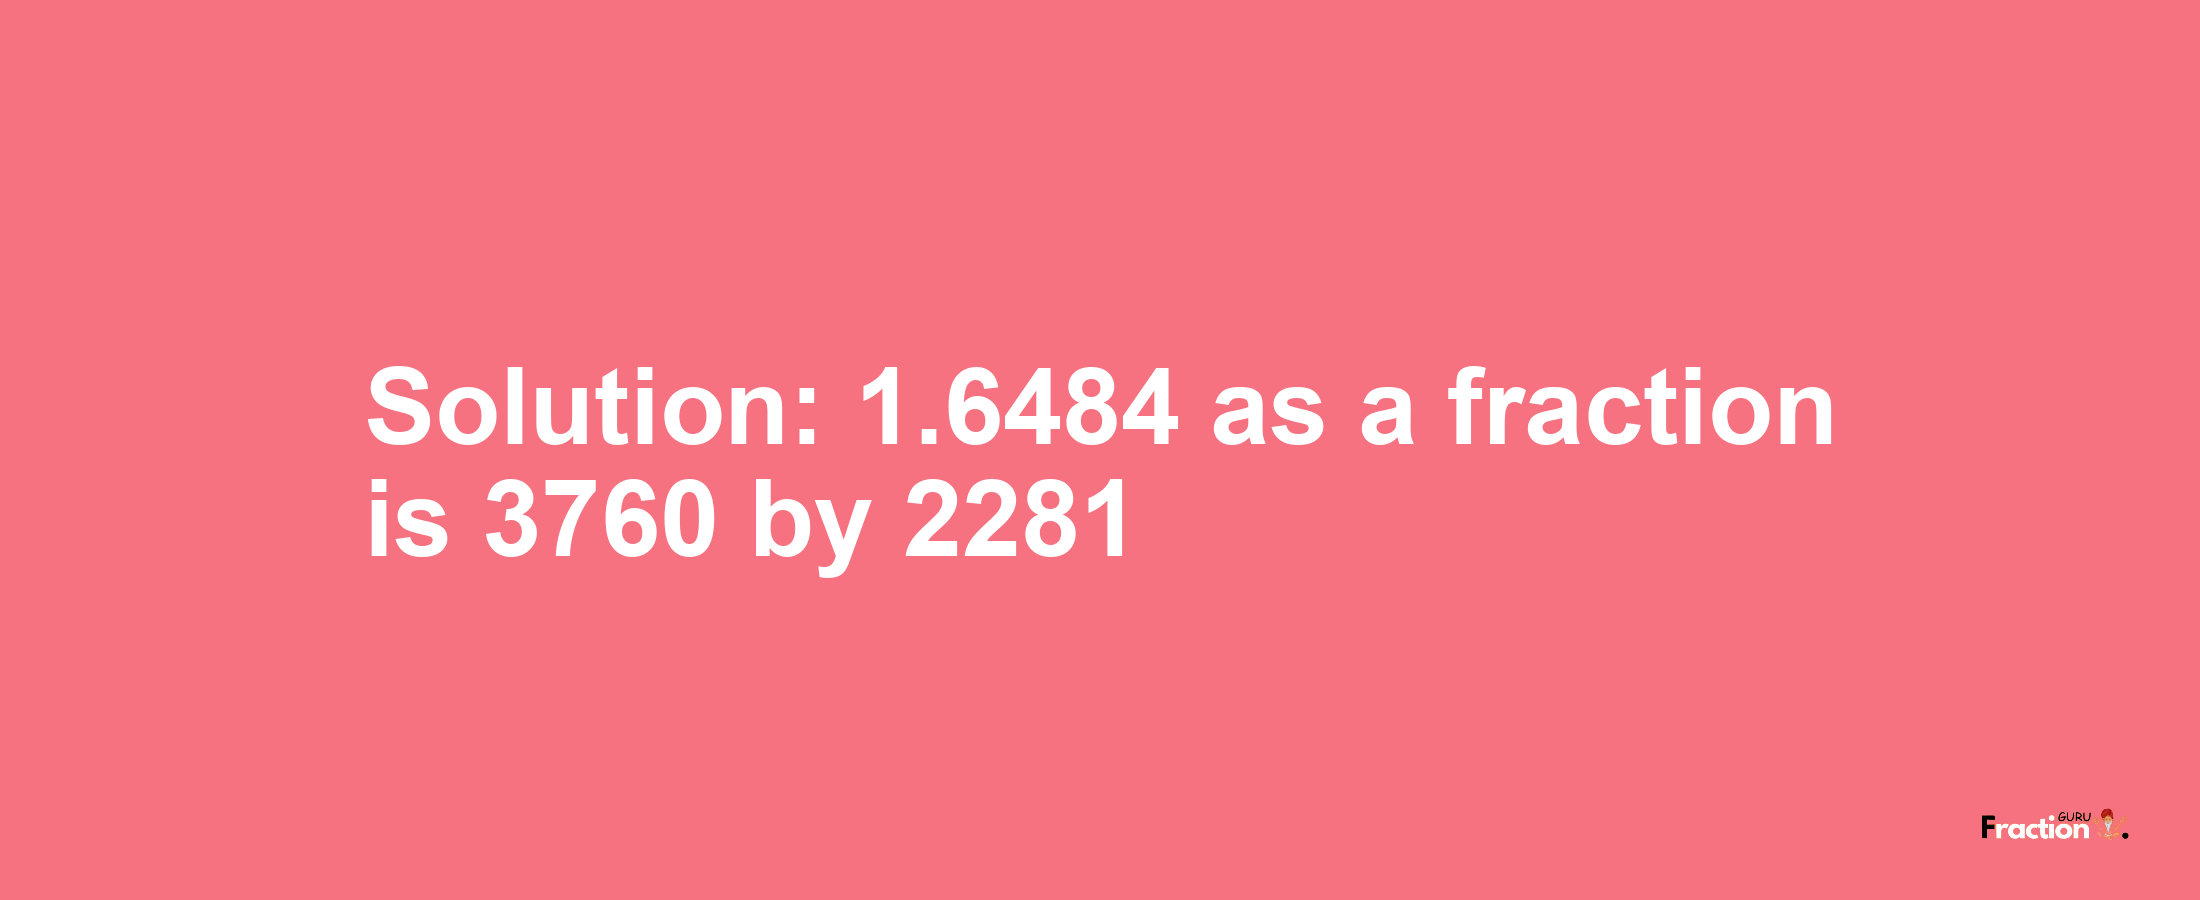 Solution:1.6484 as a fraction is 3760/2281